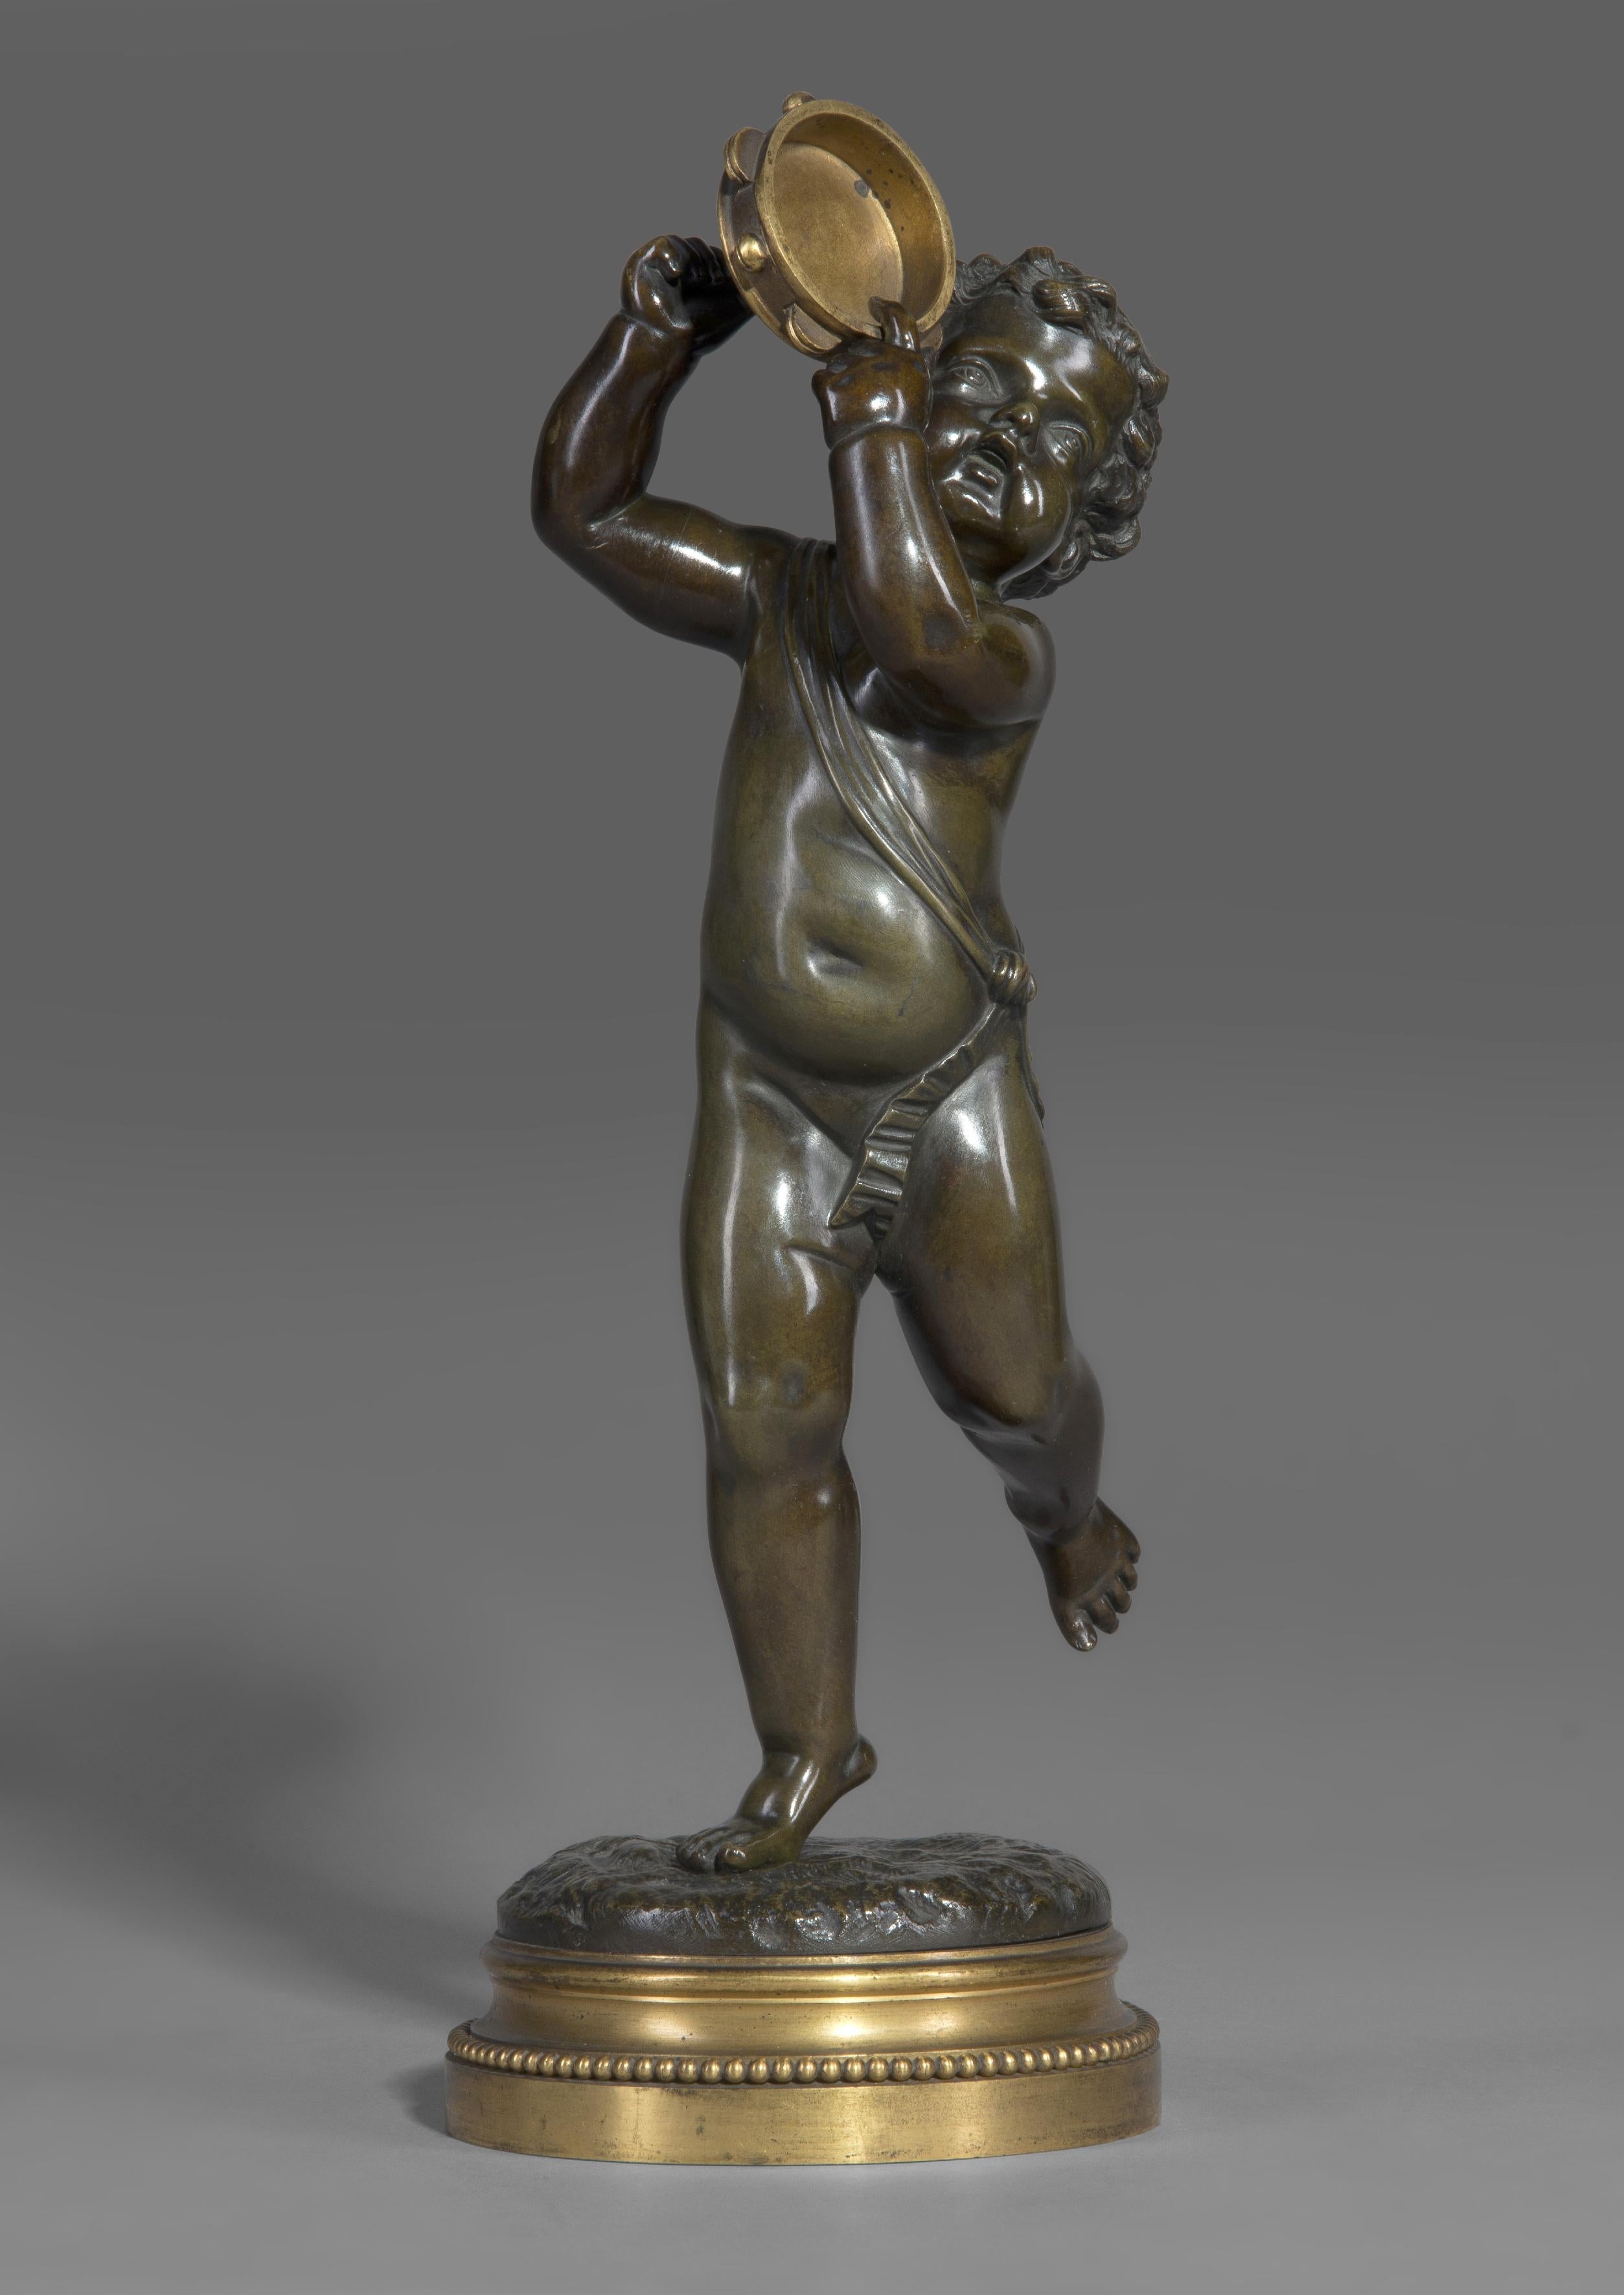 A fine Patinated and gilt bronze figure of a dancing putto holding a tambourine, after Clodion.

French, circa 1860.

Signed to the base 'Clodion'.

The son-in-law of sculptor Augustin Pajou, Clodion, (Claude Michel), (1738-1814), trained in